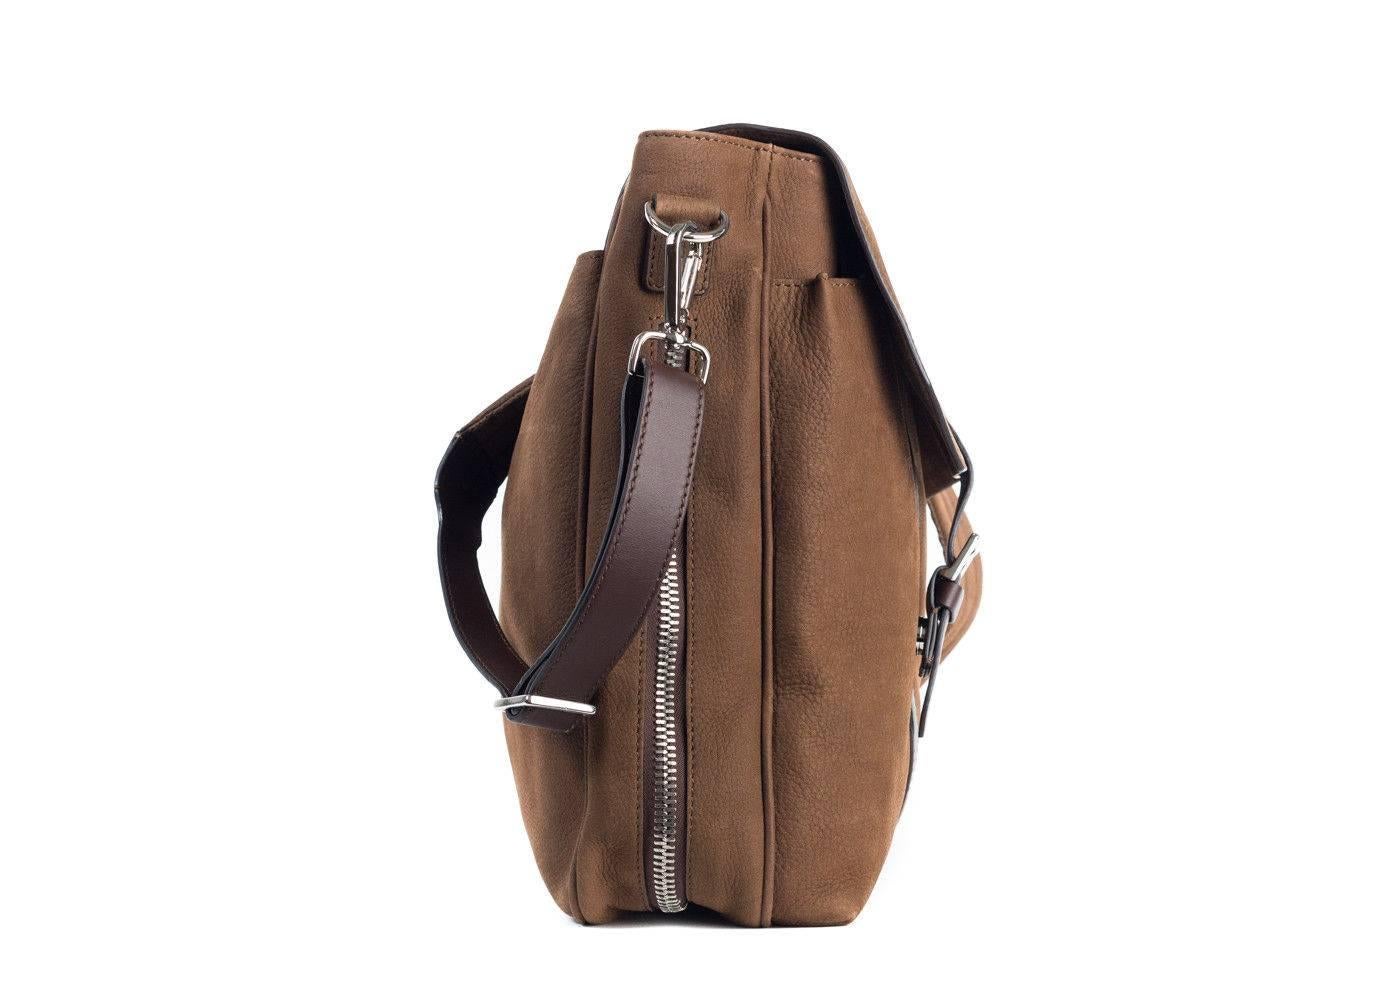 Brand New Brunello Cucinelli Messenger Bag
Dust Bag Included
Retails in Stores & Online for $2995
Dimensions: 19